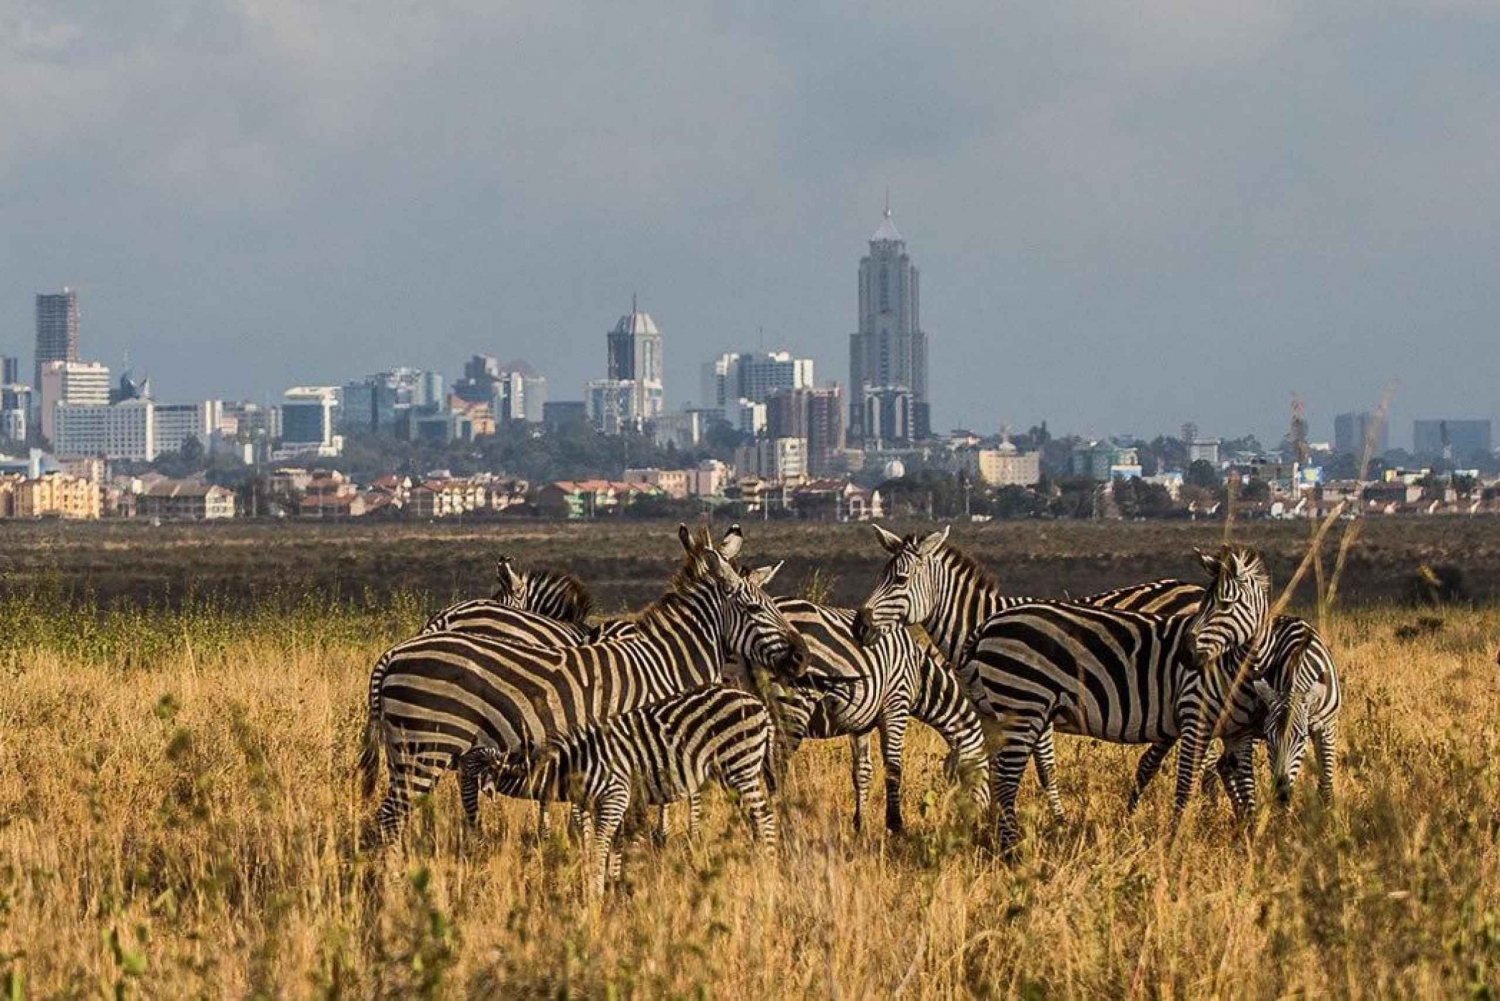 Half-Day Nairobi National Park Guided Tour With Free Pickup